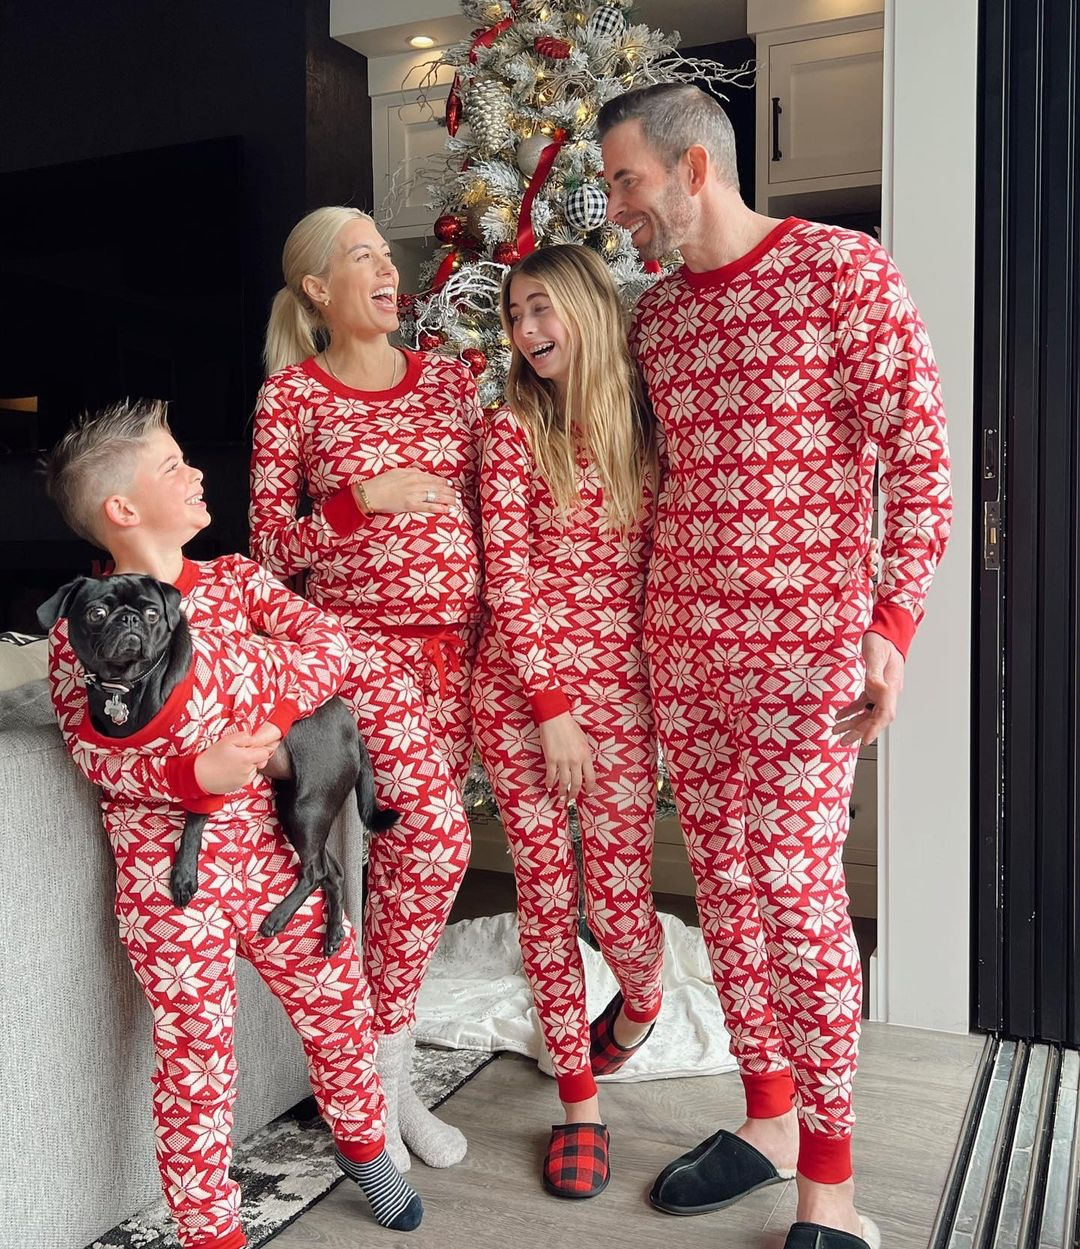 The Best Holiday Pajamas For Women